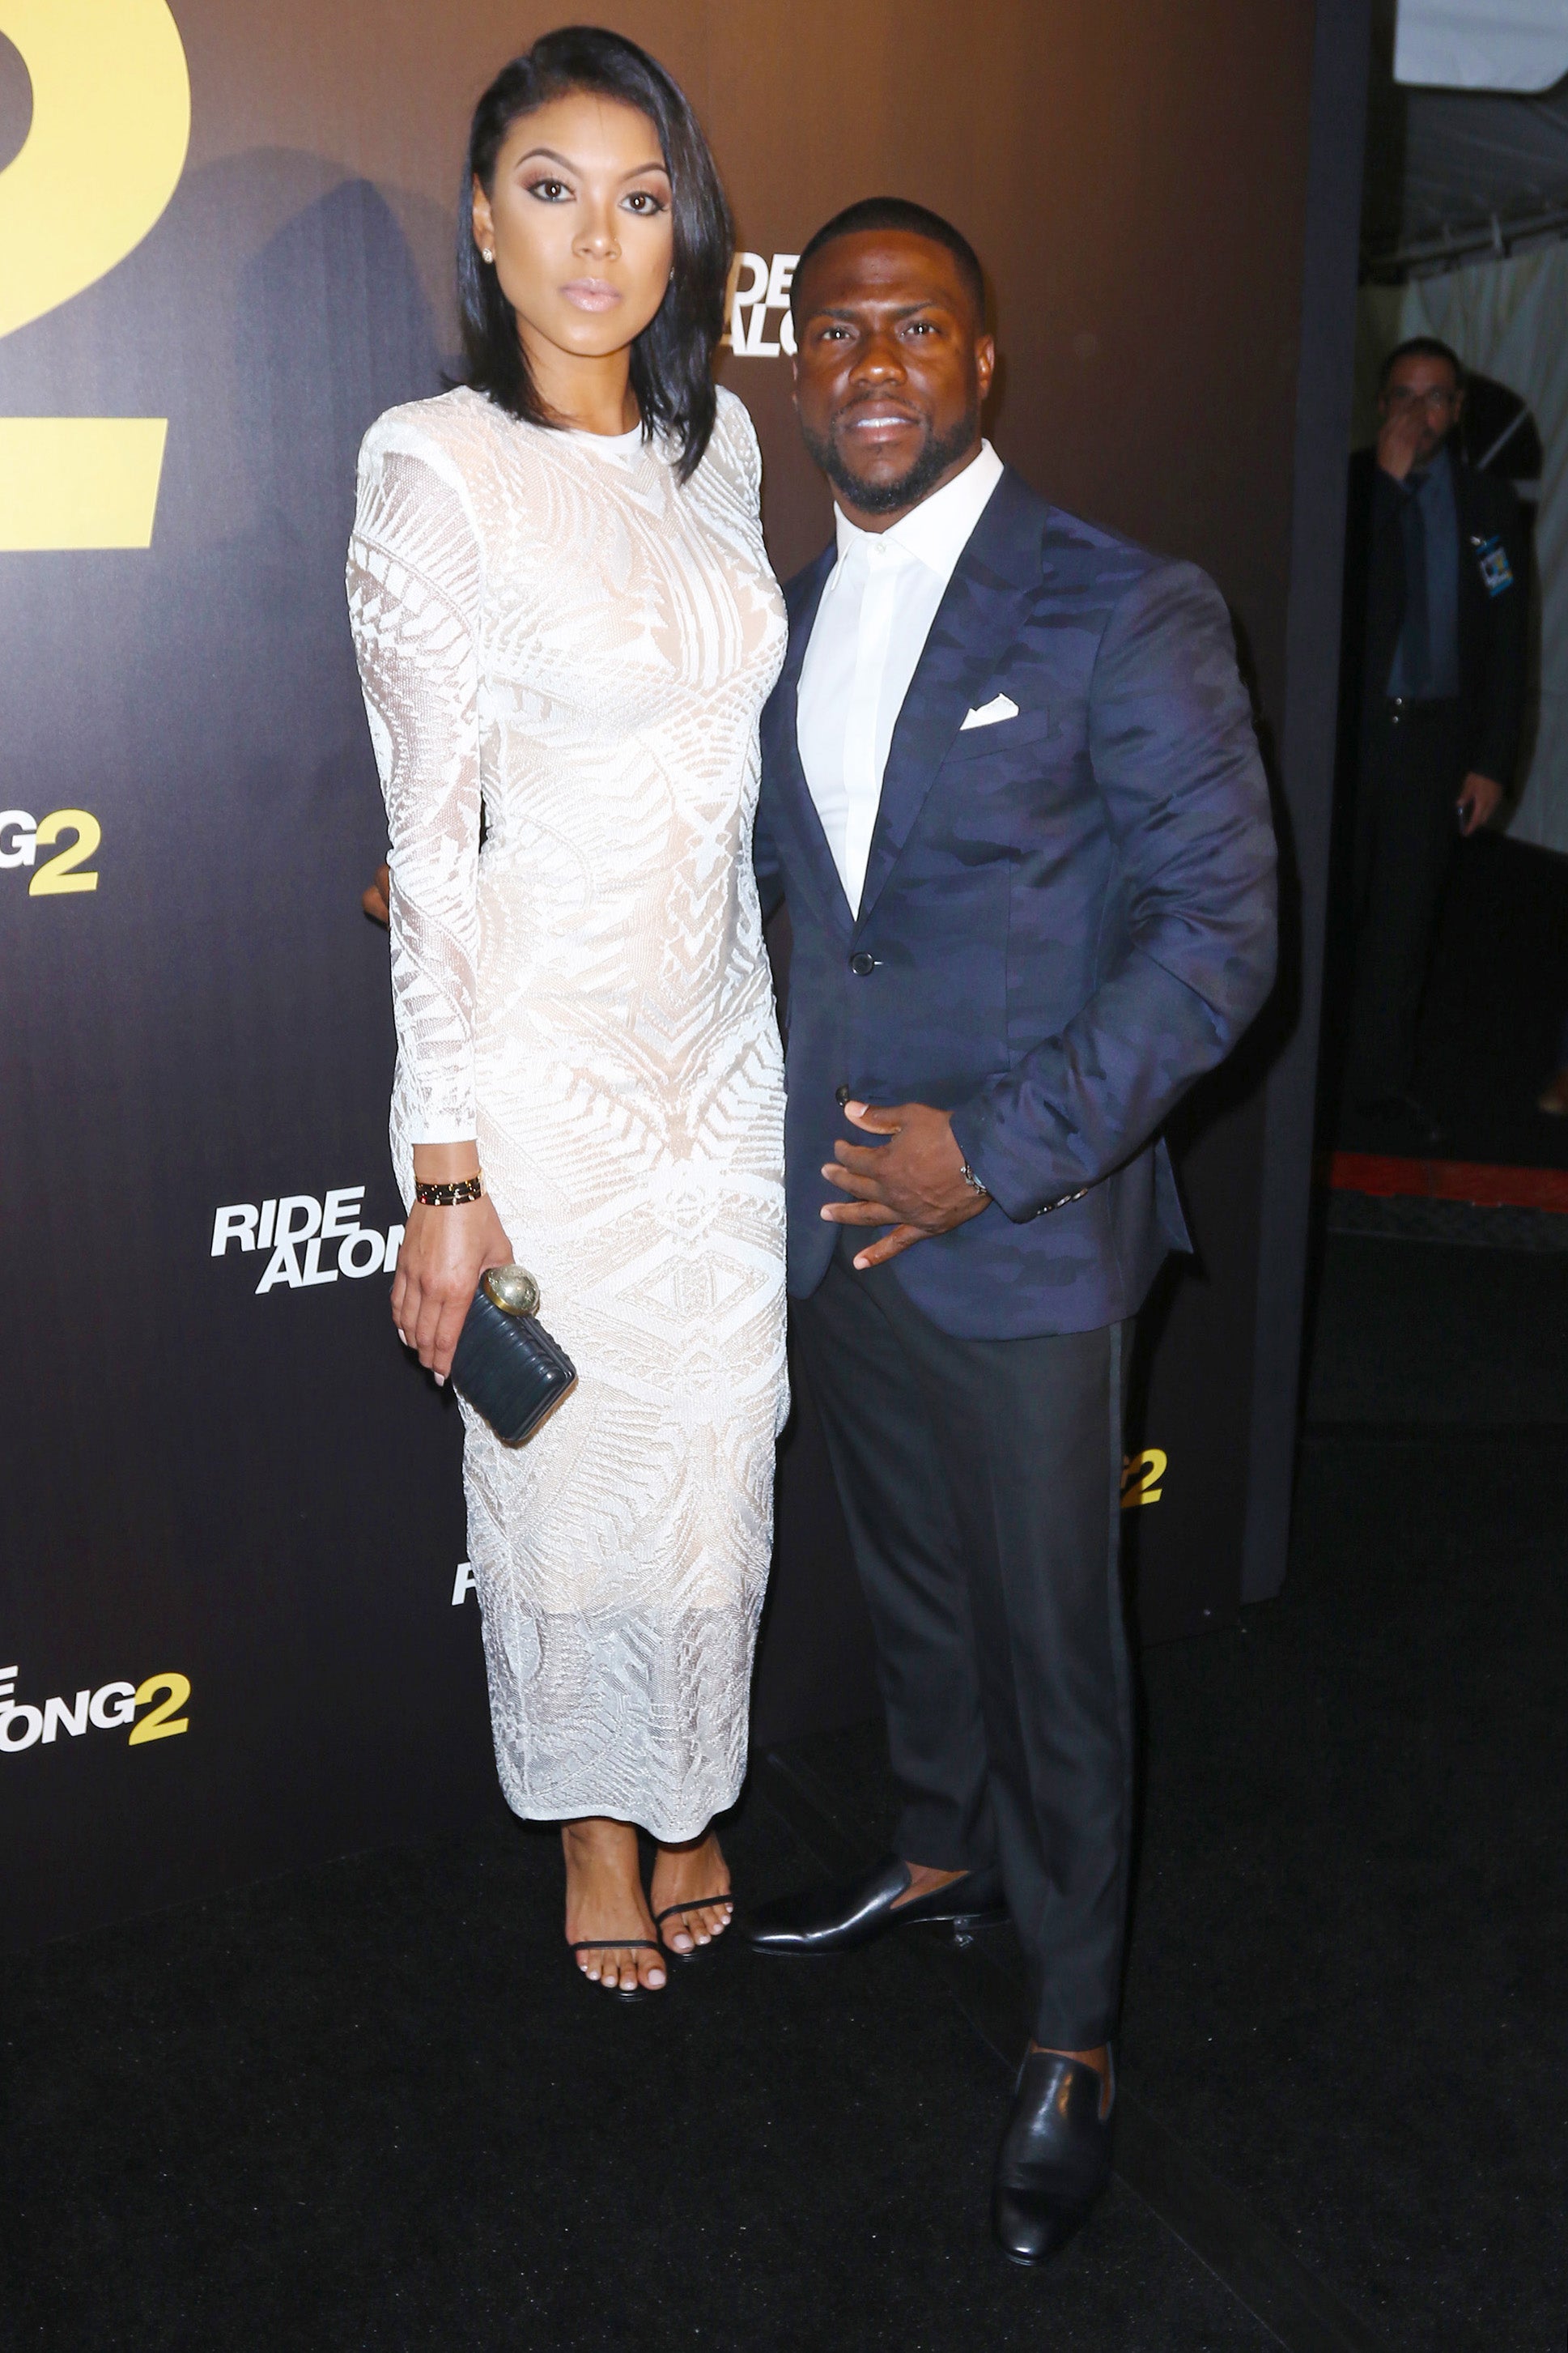 Kevin and Eniko Hart's Best Red Carpet Moments
